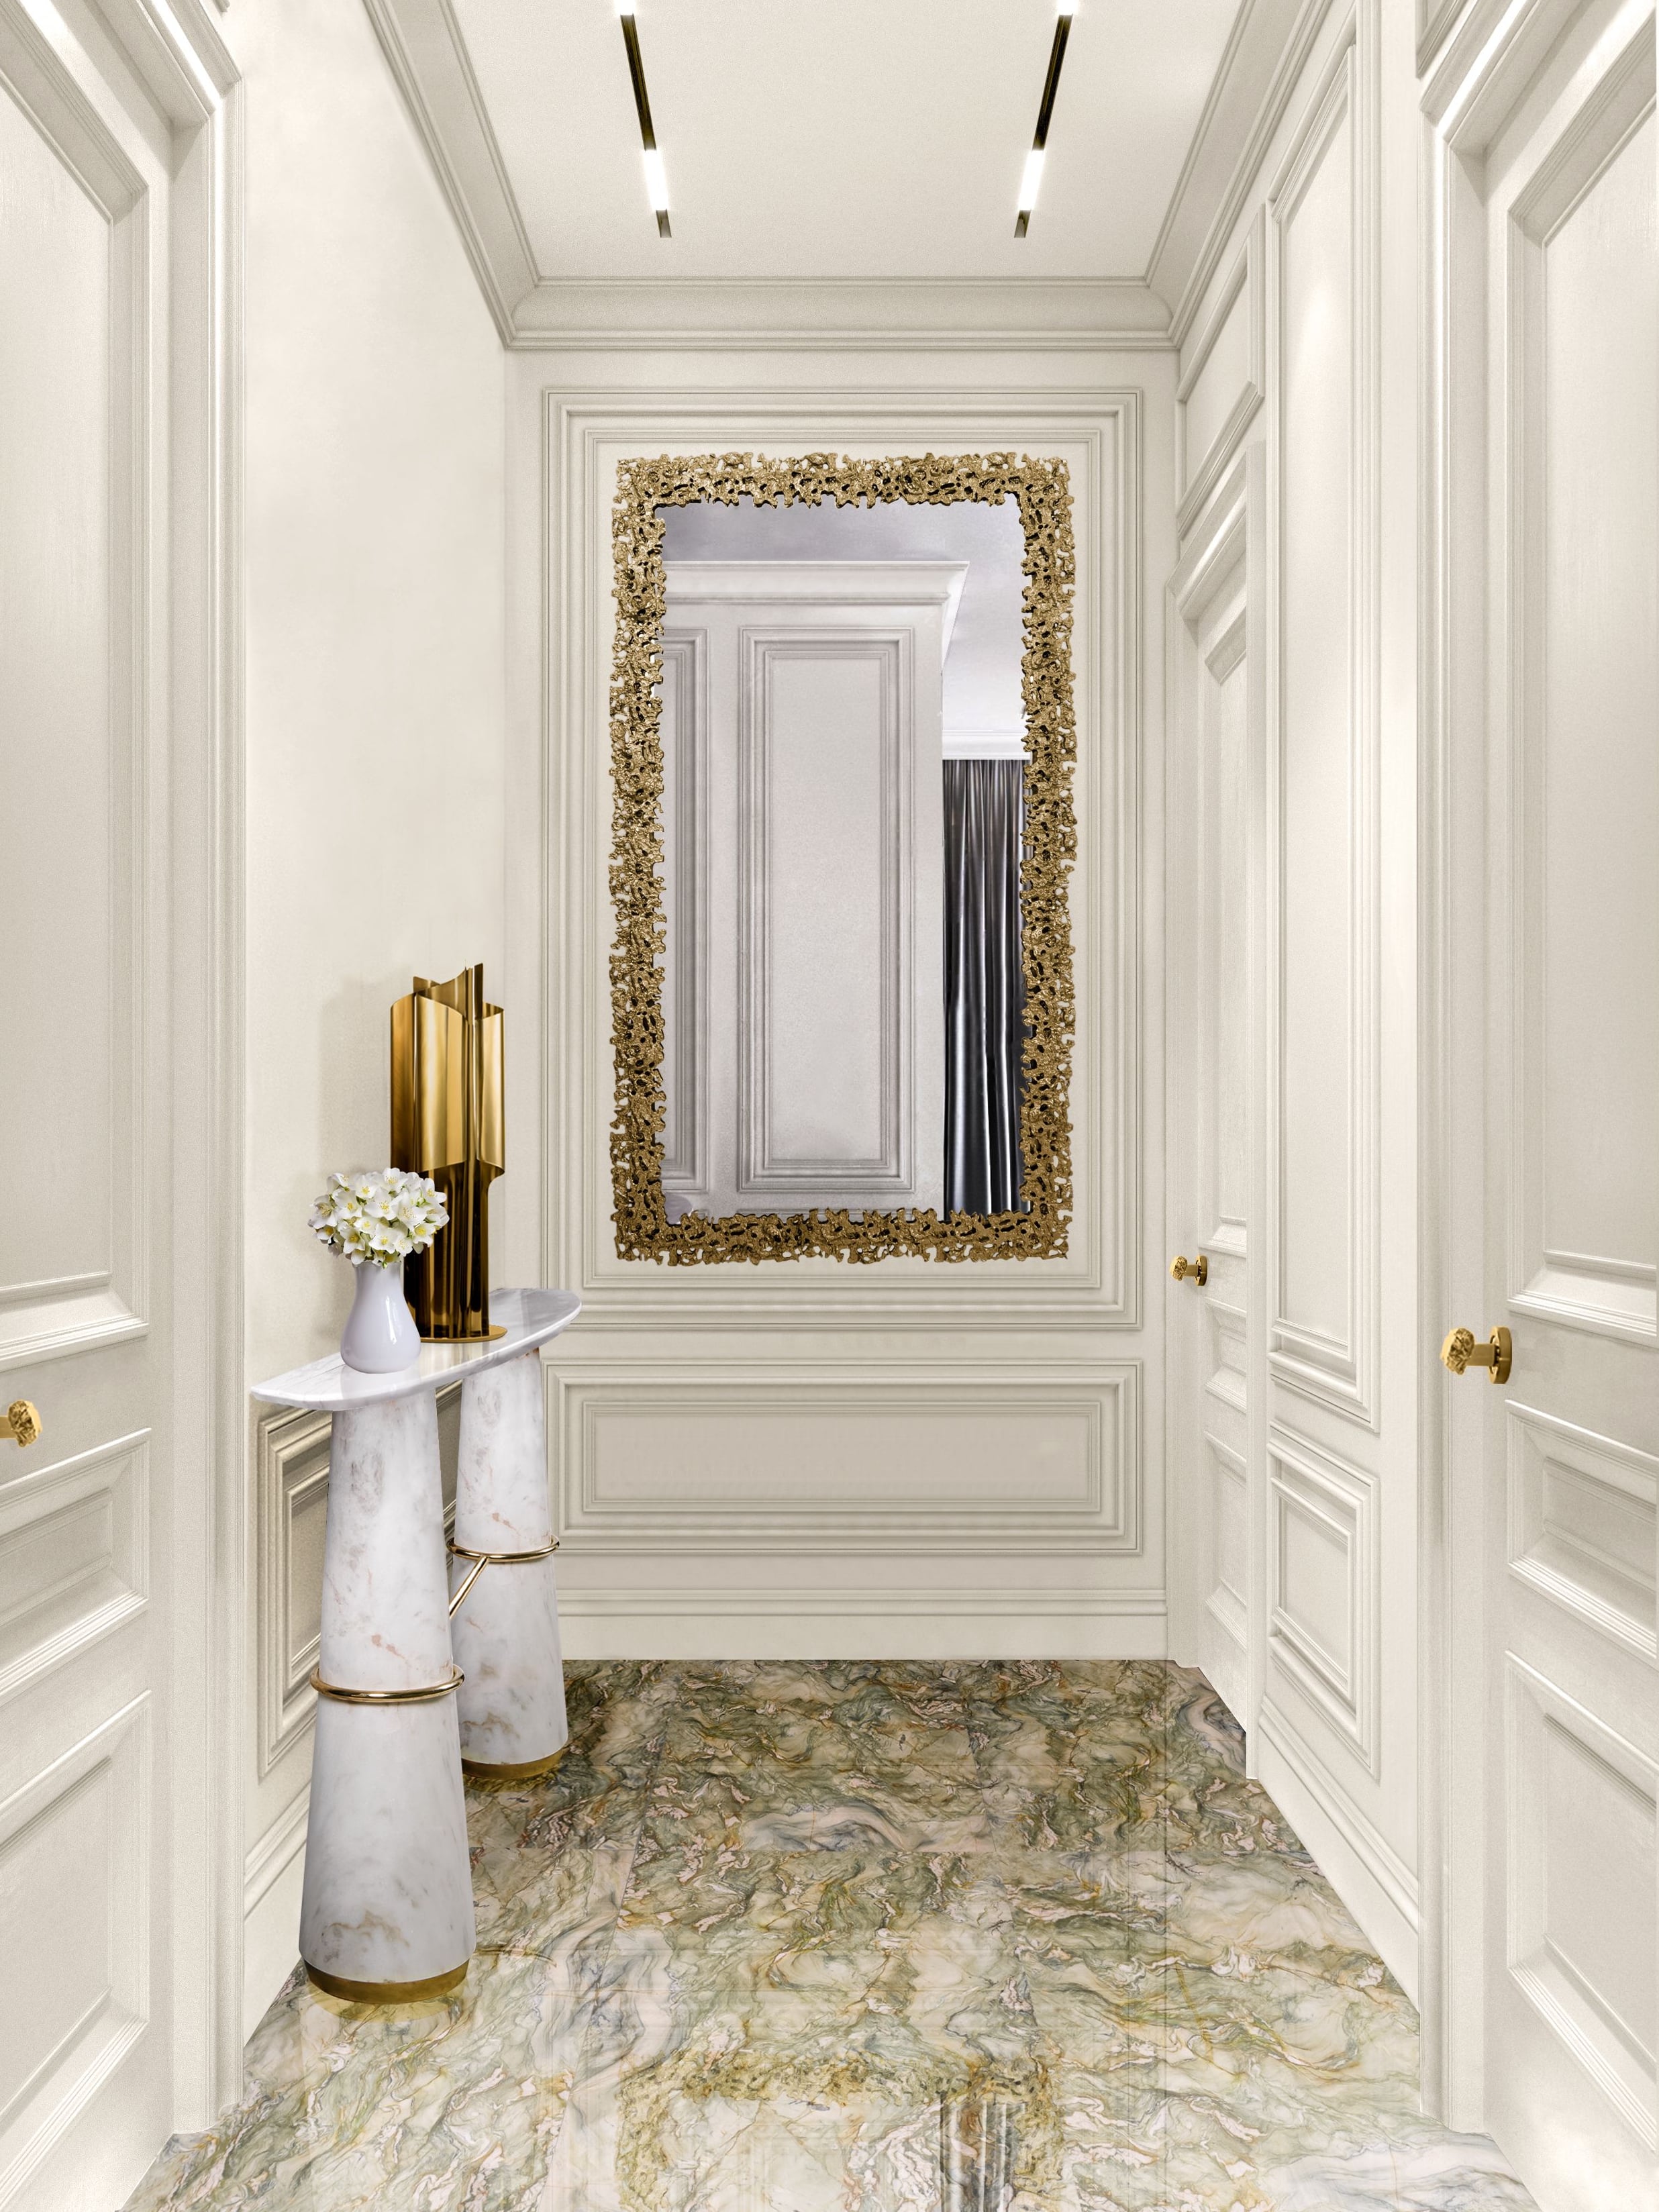 Elegant Entryway With Golden Mirror And Marbled Floor - Home'Society